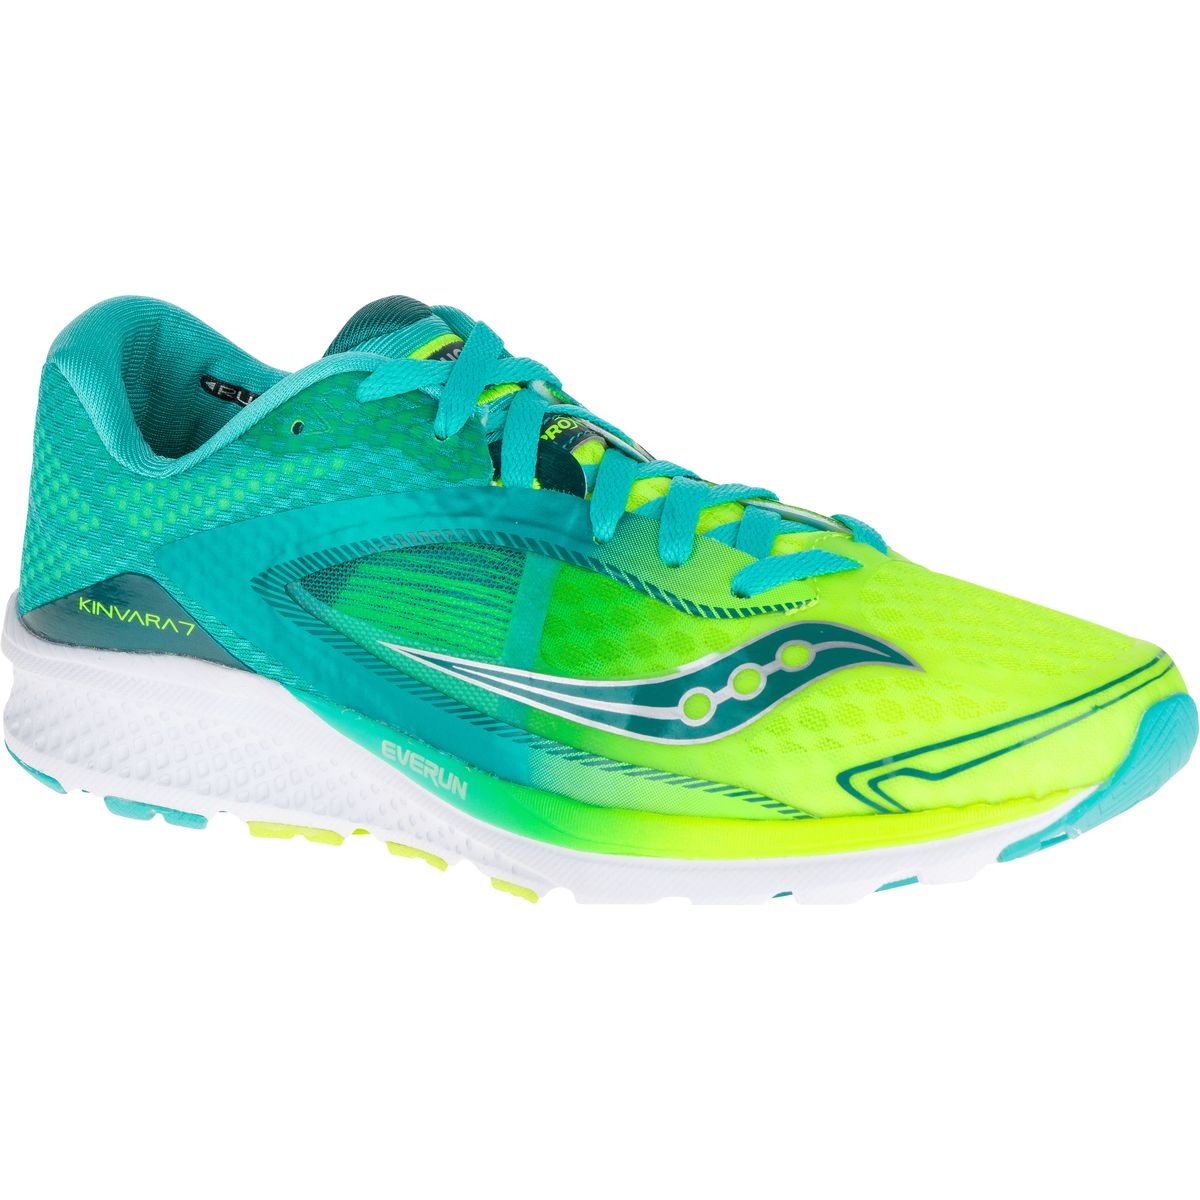 Saucony Kinvara 7 Running Shoe - Women's | Competitive Cyclist